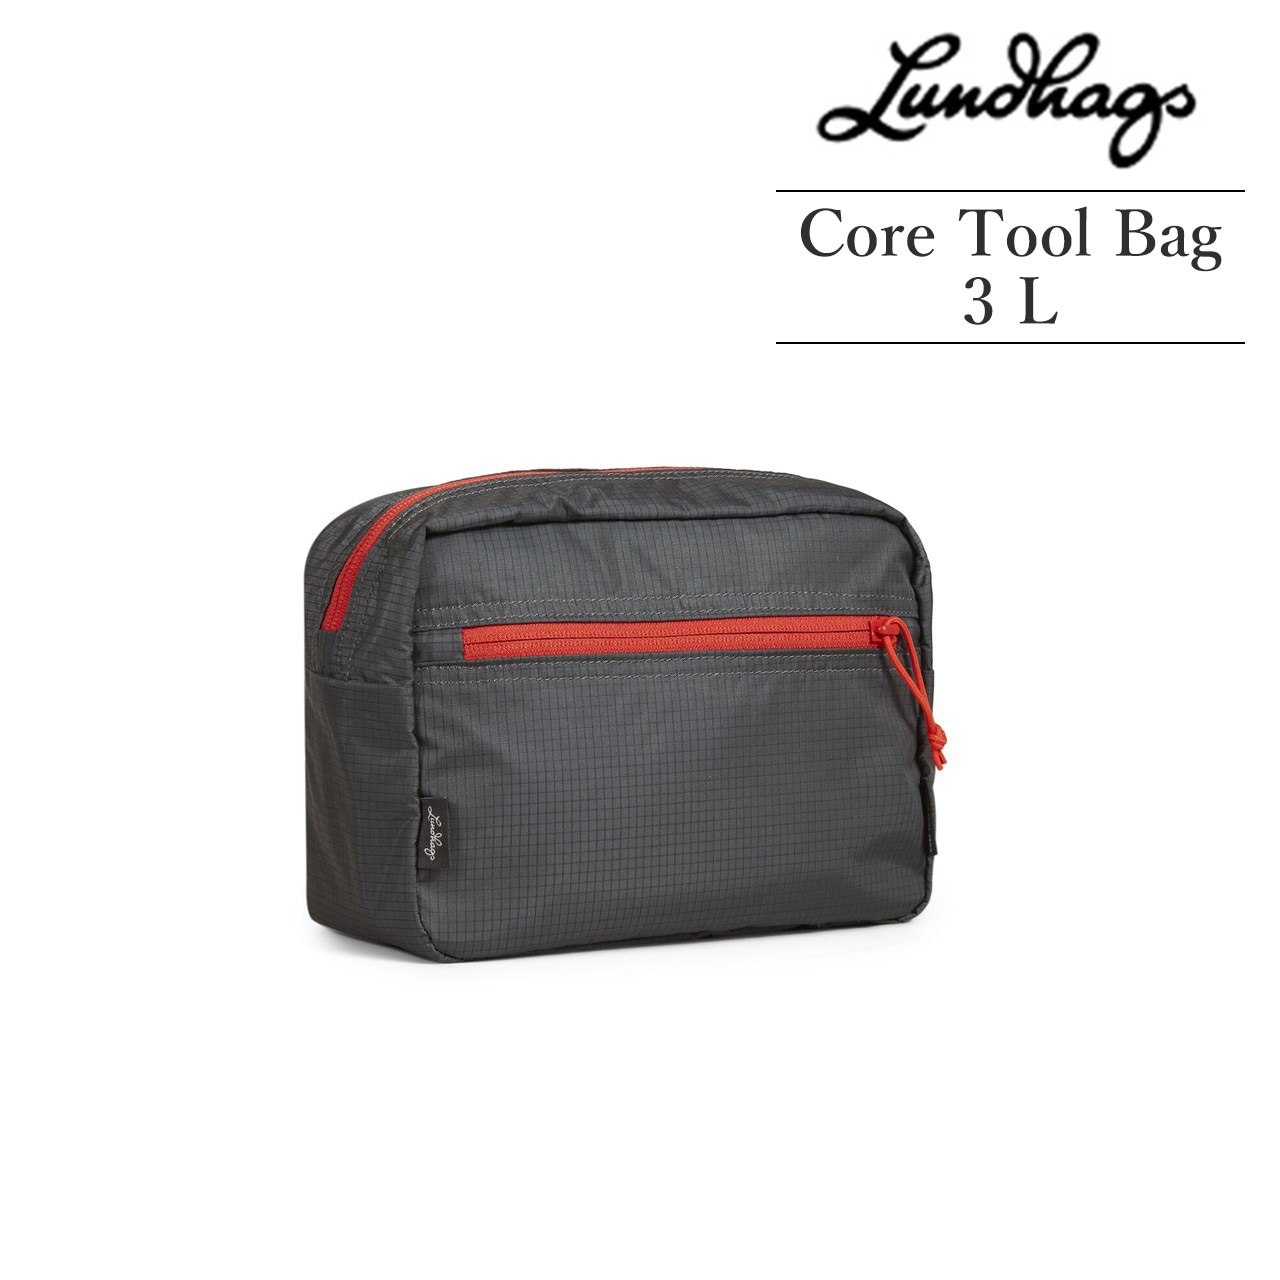 Lundhags 北欧生まれの 高機能 防水 バックパック ツールバッグ Core Tool Bag 3 L